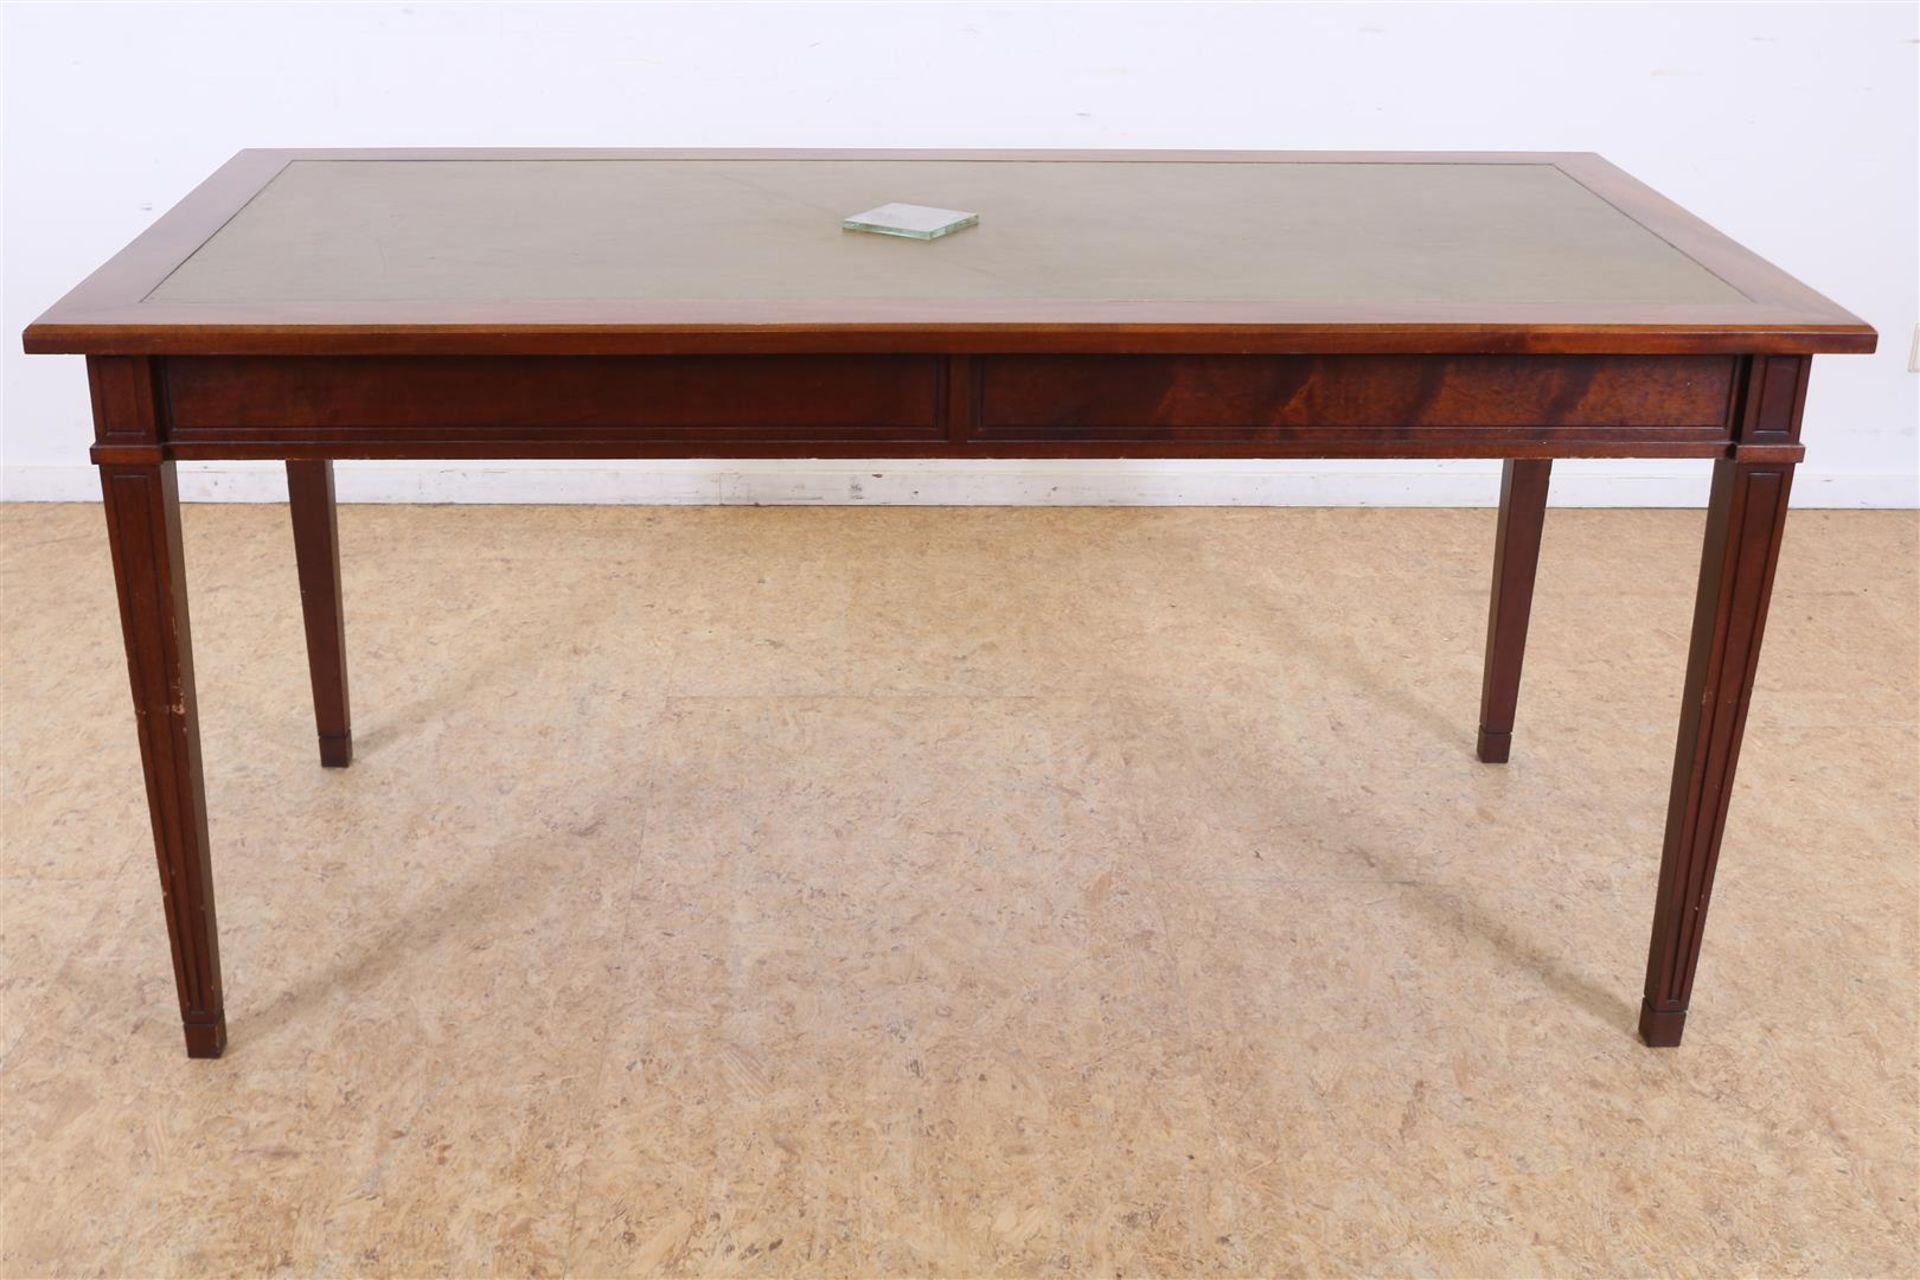 Mahogany desk with green inlaid top on tapered legs, h. 77, w. 160, d. 80 cm. (glass plate glued